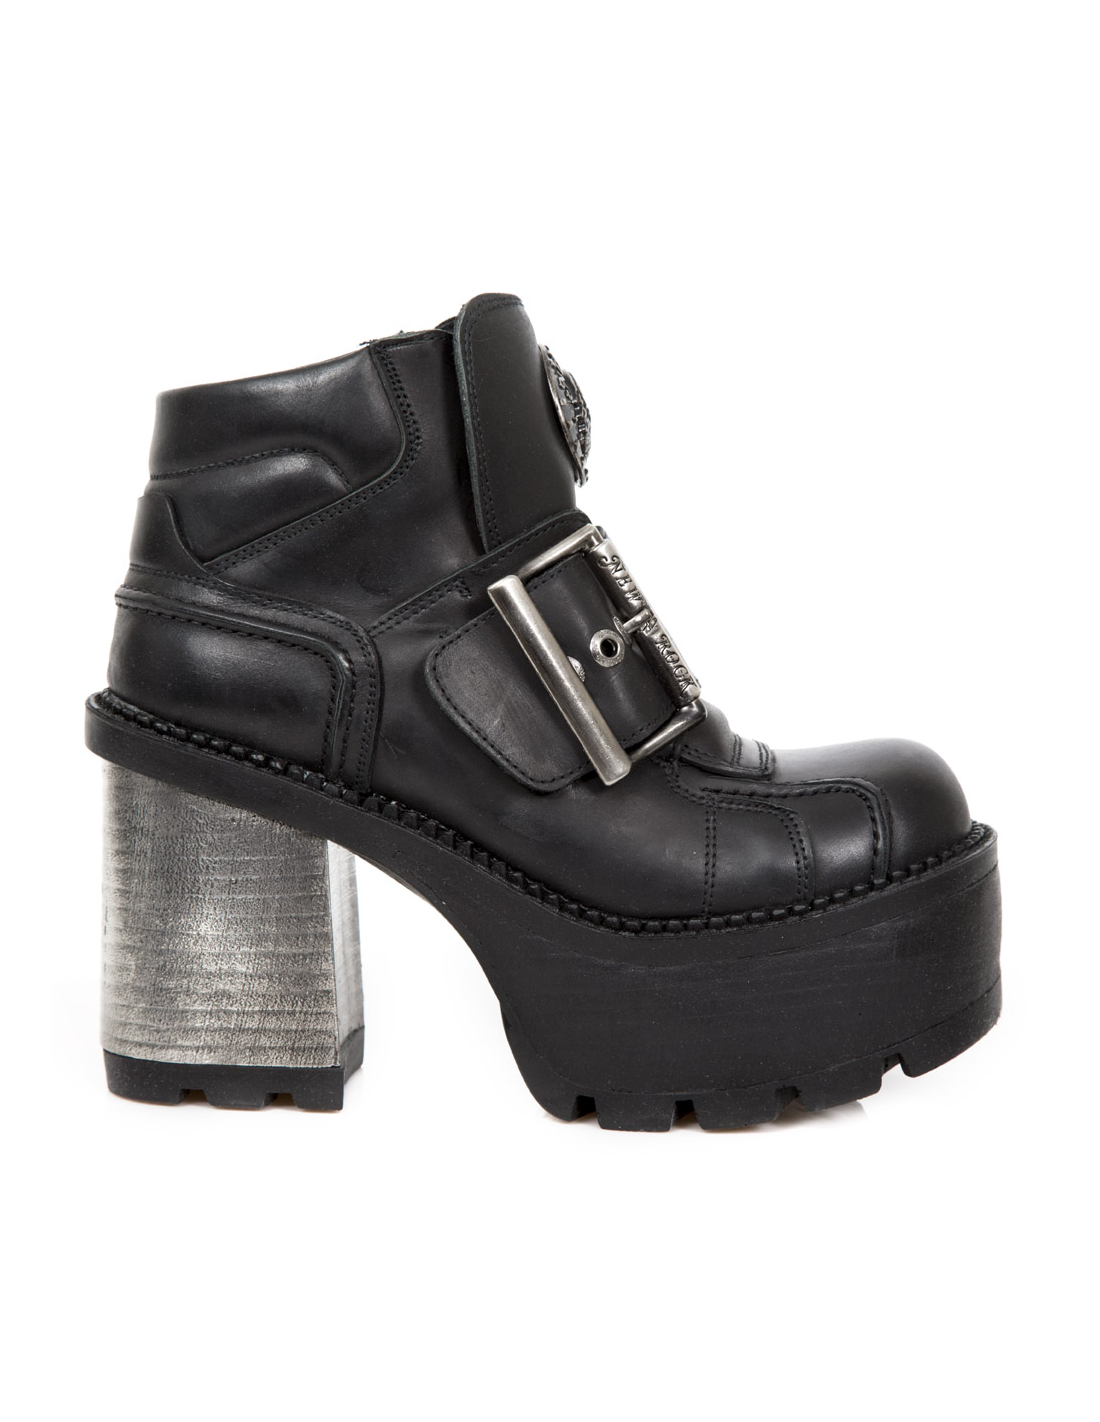 ANKLE BOOT TRAIL M-SEVE08-S1